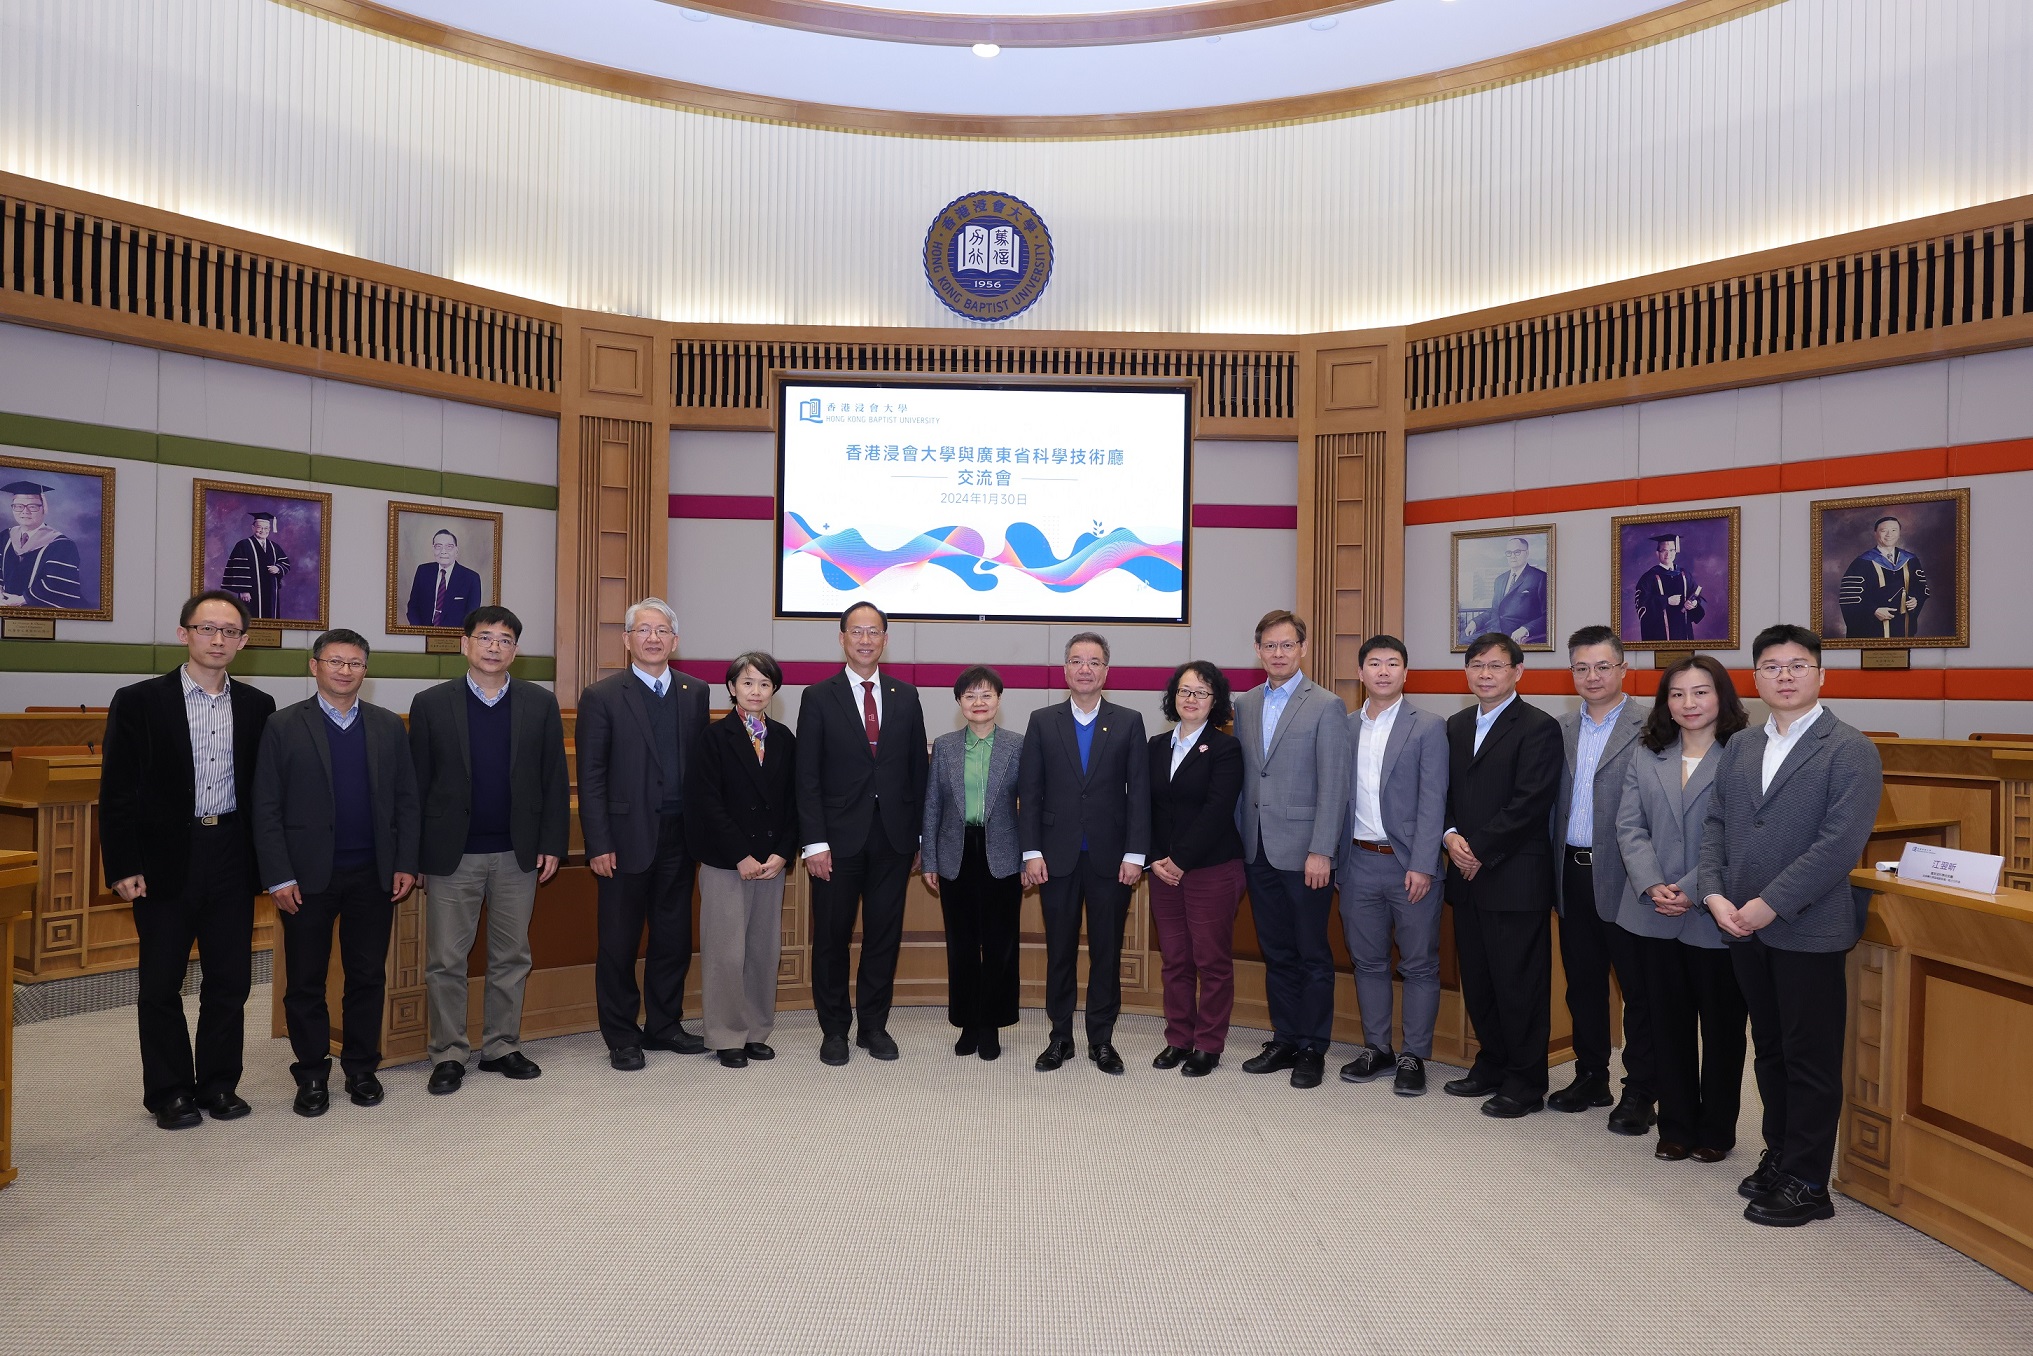 Delegation from Department of Science and Technology of Guangdong Province visits HKBU